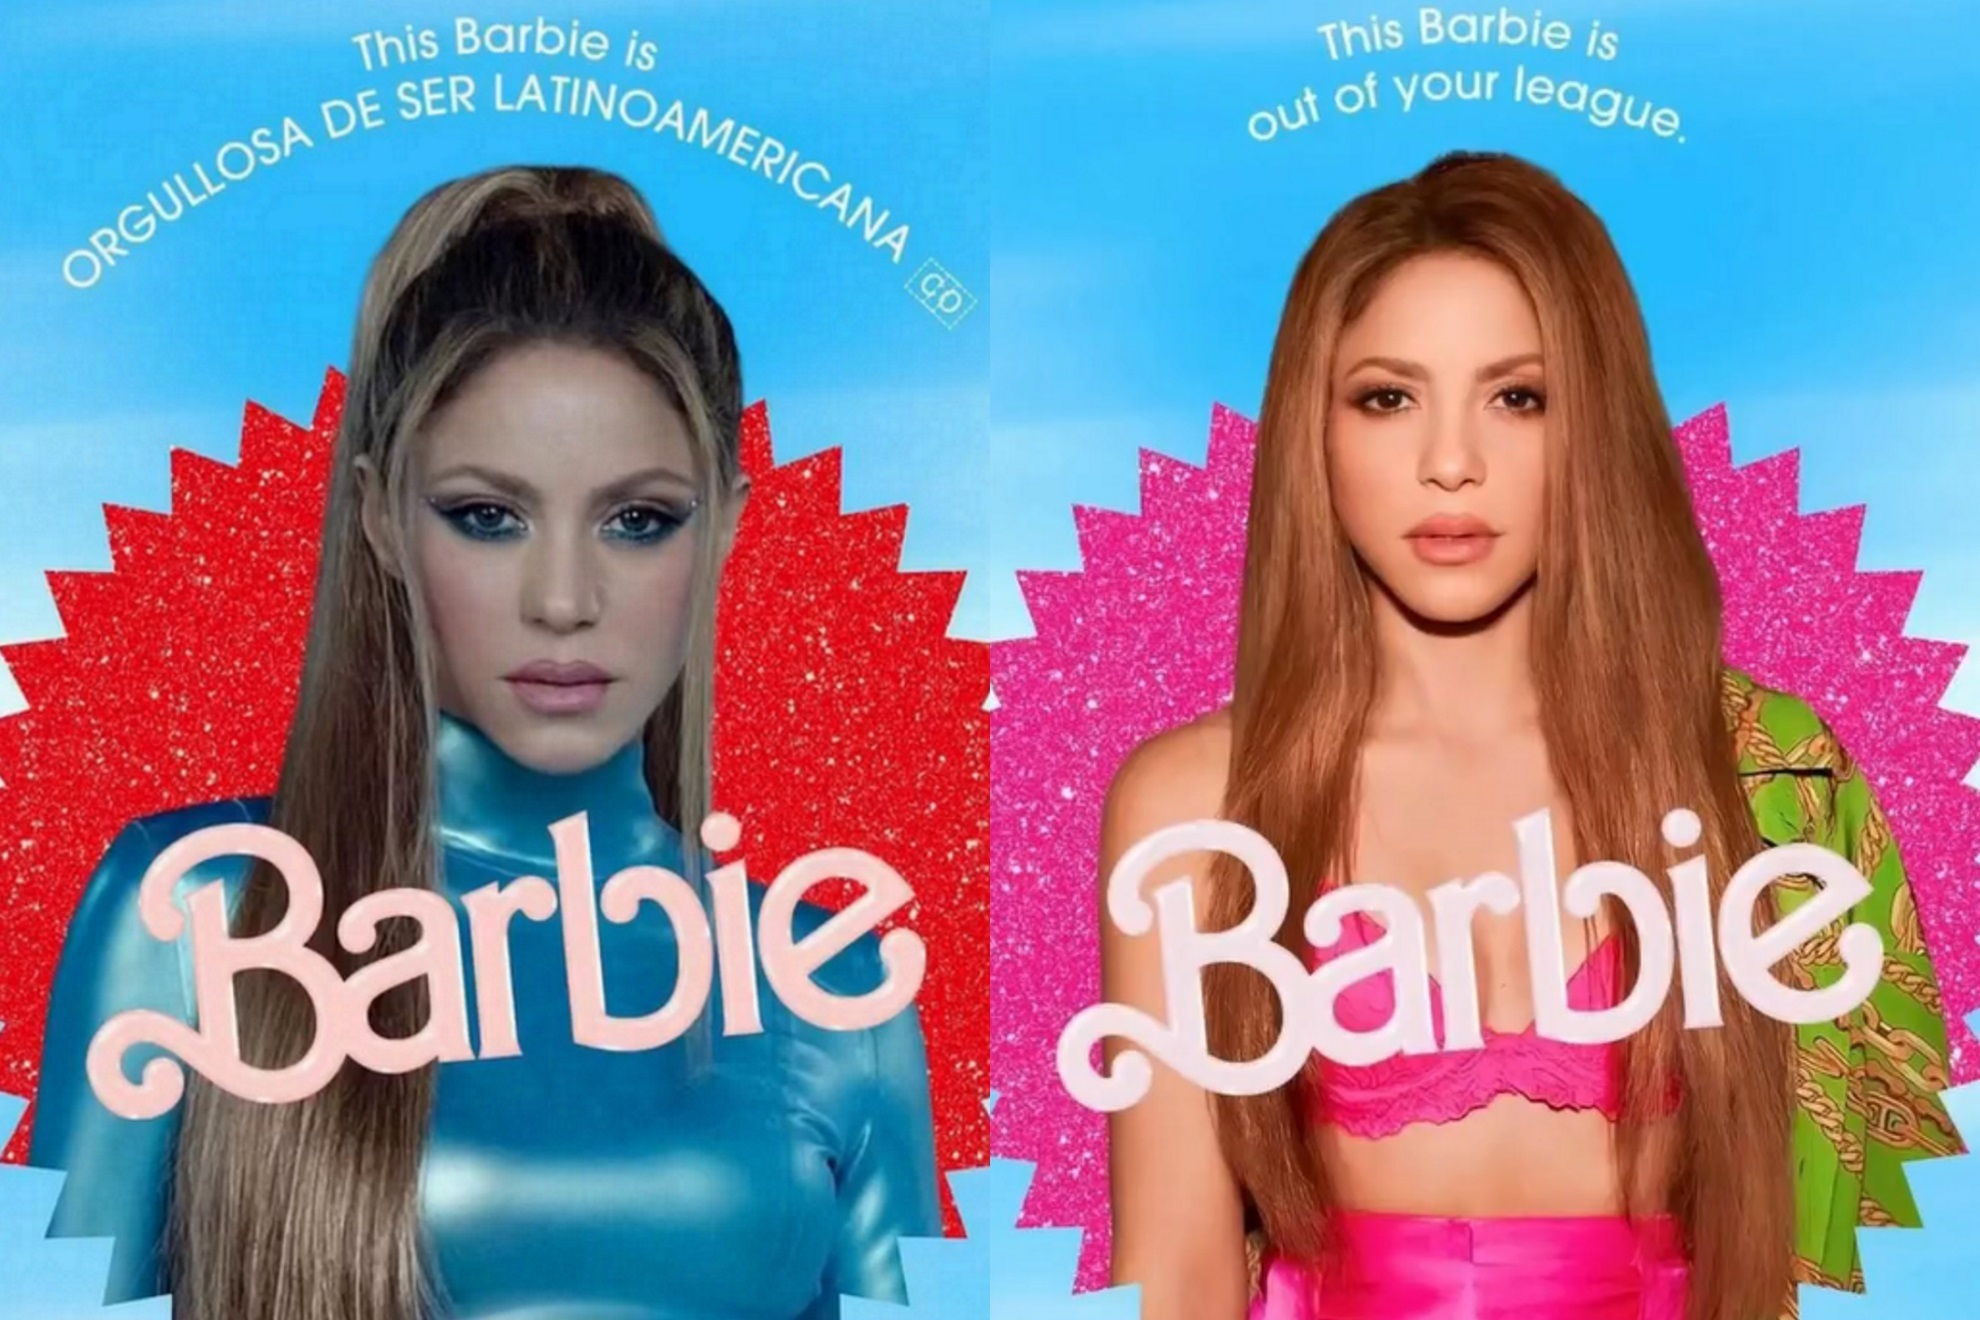 Shakira and her latest shot at Pique: This Barbie is out of your league | Marca